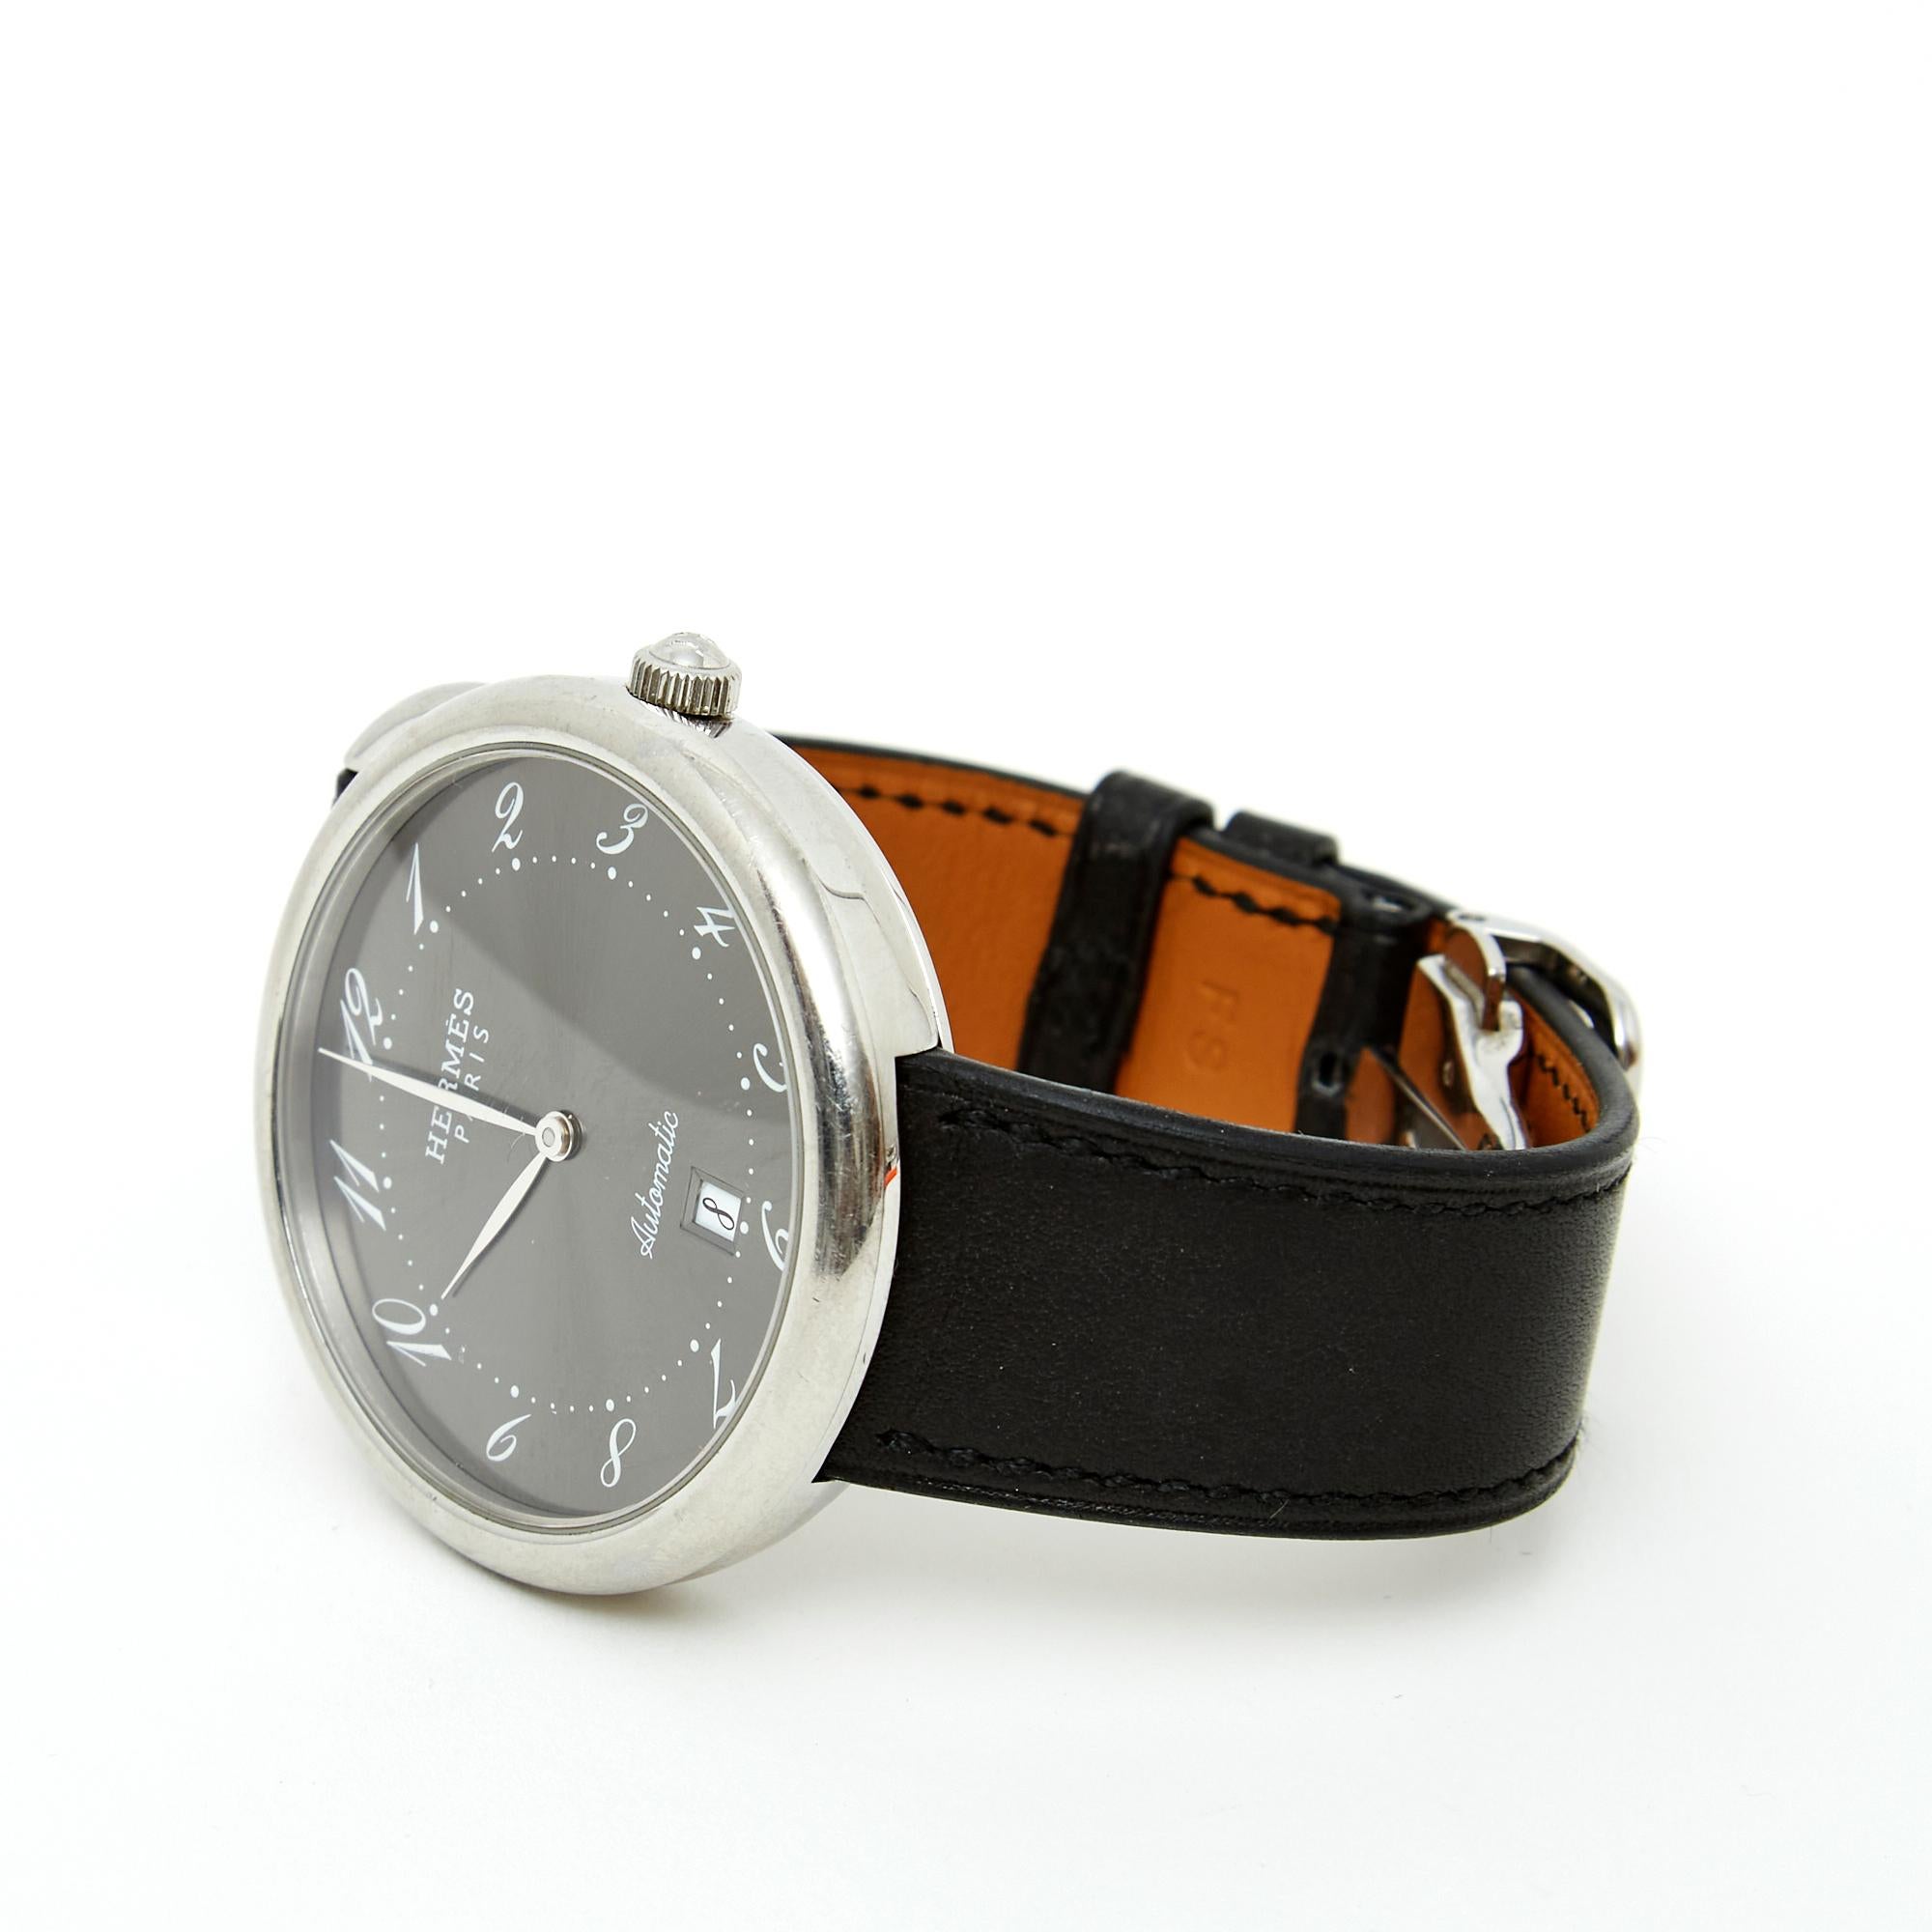 Hermès watch model Arceau Automatic movement, steel case, satin anthracite dial, italic Arabic numerals, date at 6 o'clock, black barenia leather strap, steel folding clasp. Case diameter 41 mm (excluding crown), bracelet adjustable from 16 to 18.7